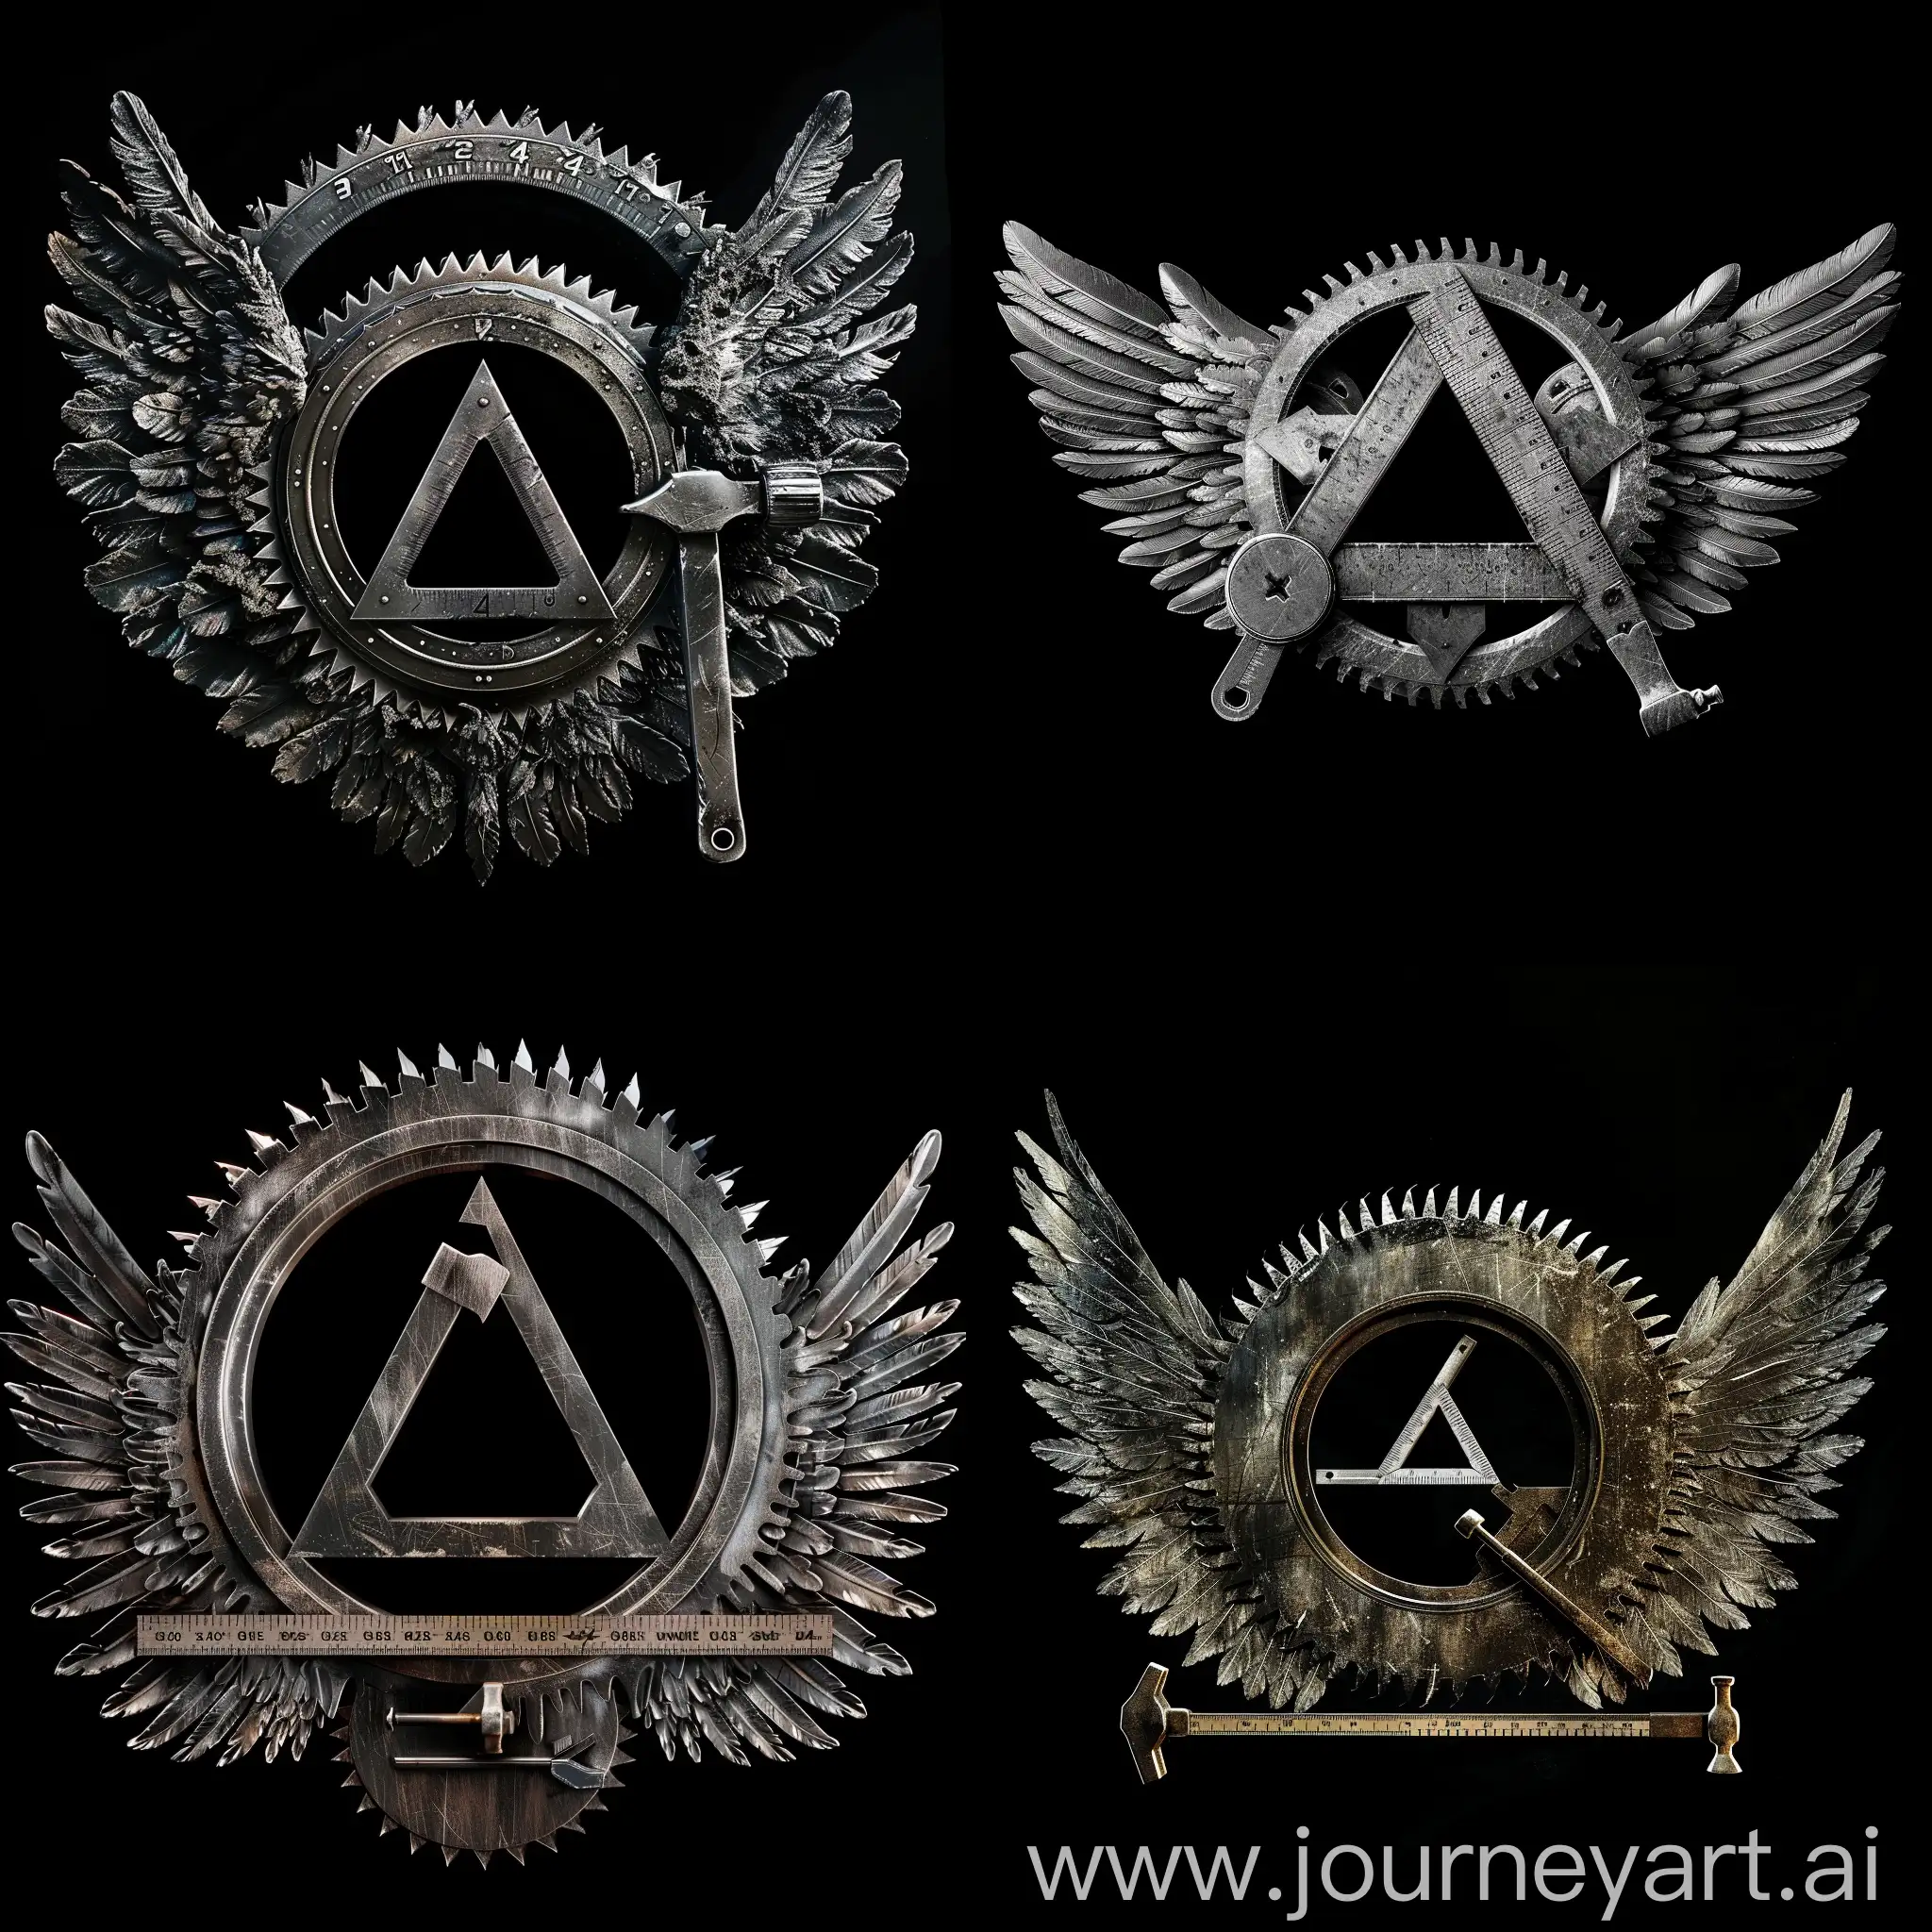  metallic logo.  a circular sawblade, a triangle ruler, a hammer - surrounded by wings.  